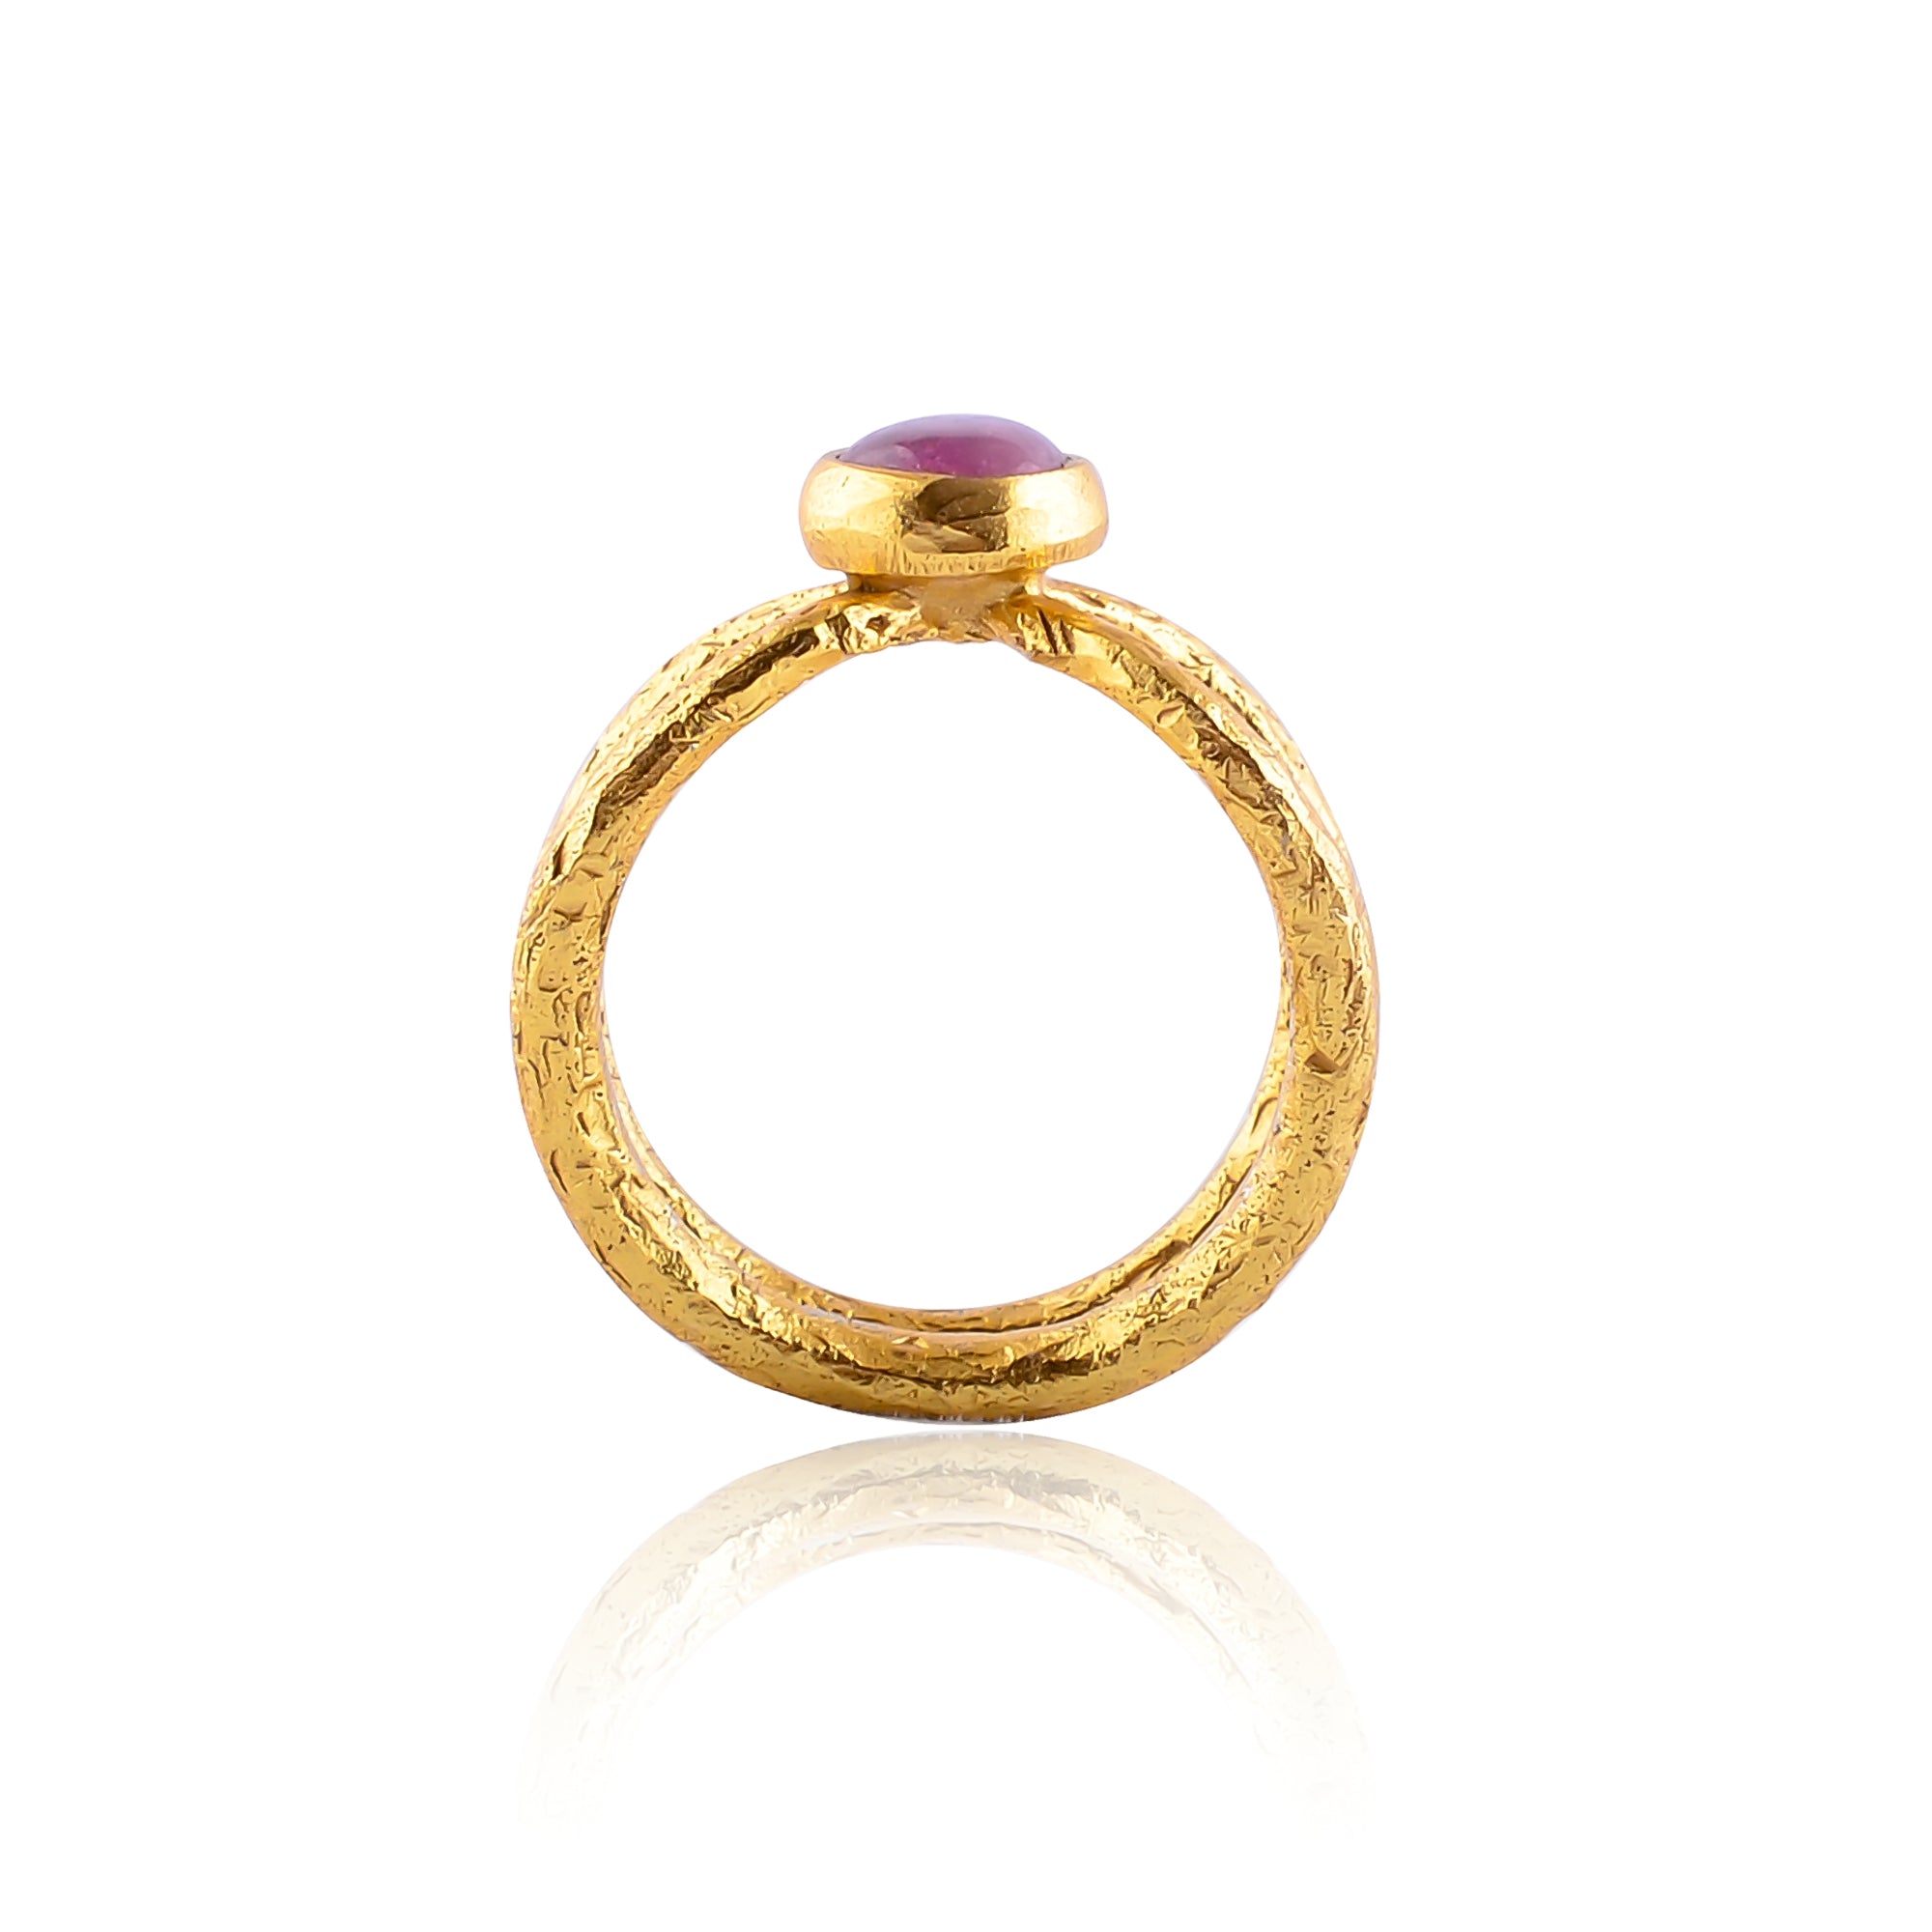 Buy Handcrafted Silver Gold Plated Ruby Ring